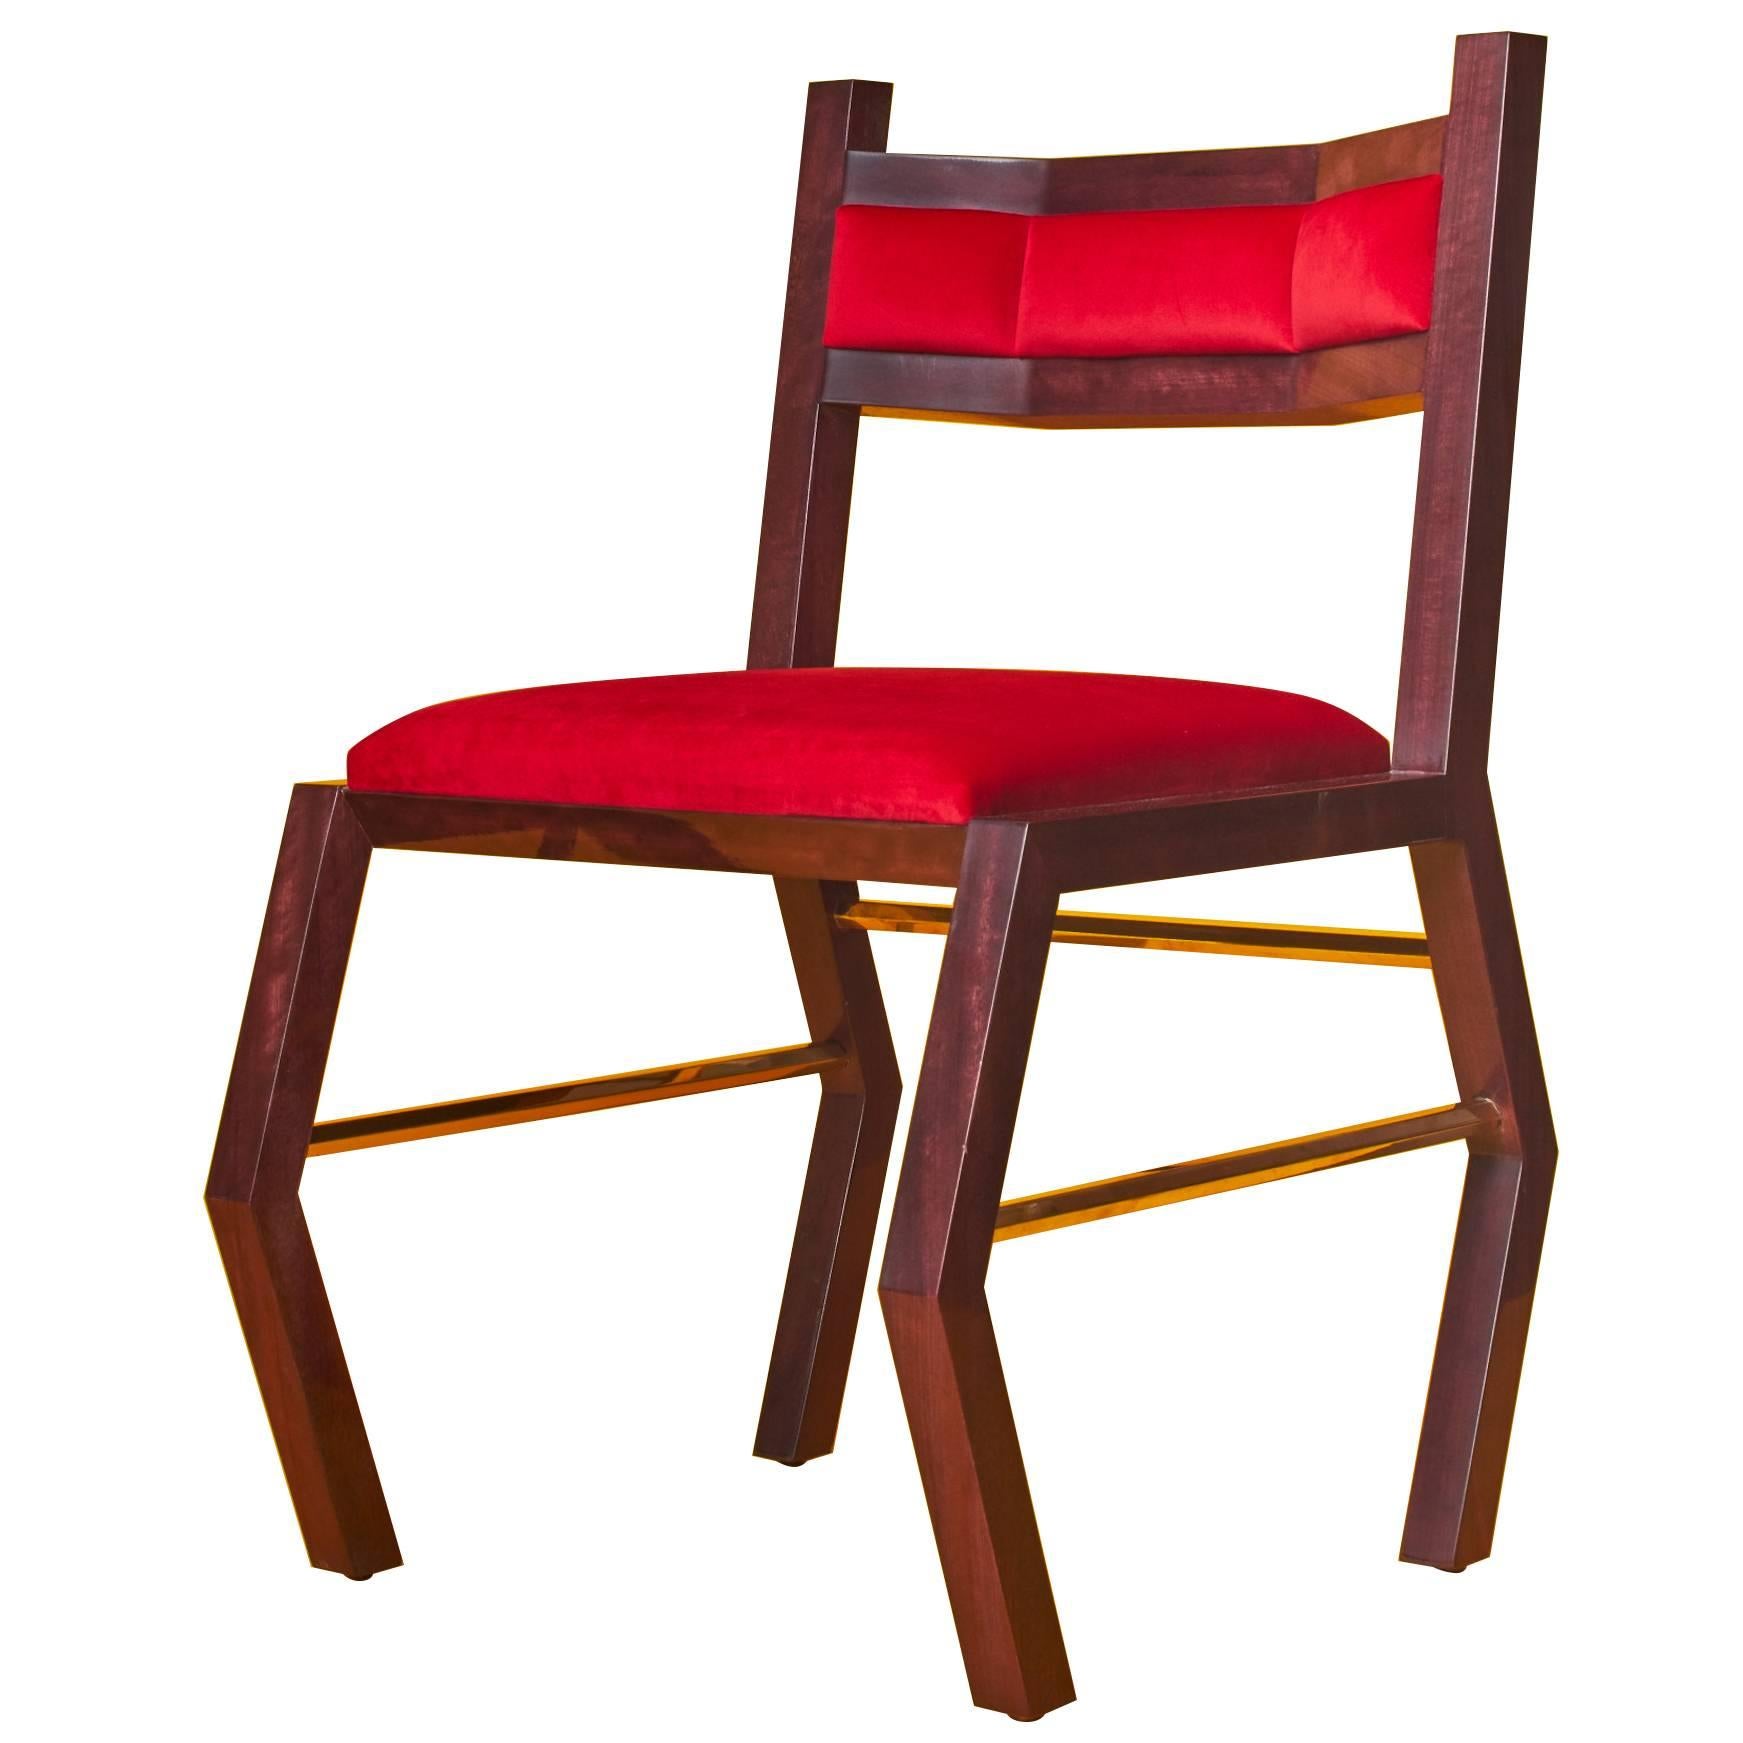 Solid Purpleheart Wood Chair With Red Velvet Upholstery And Brass